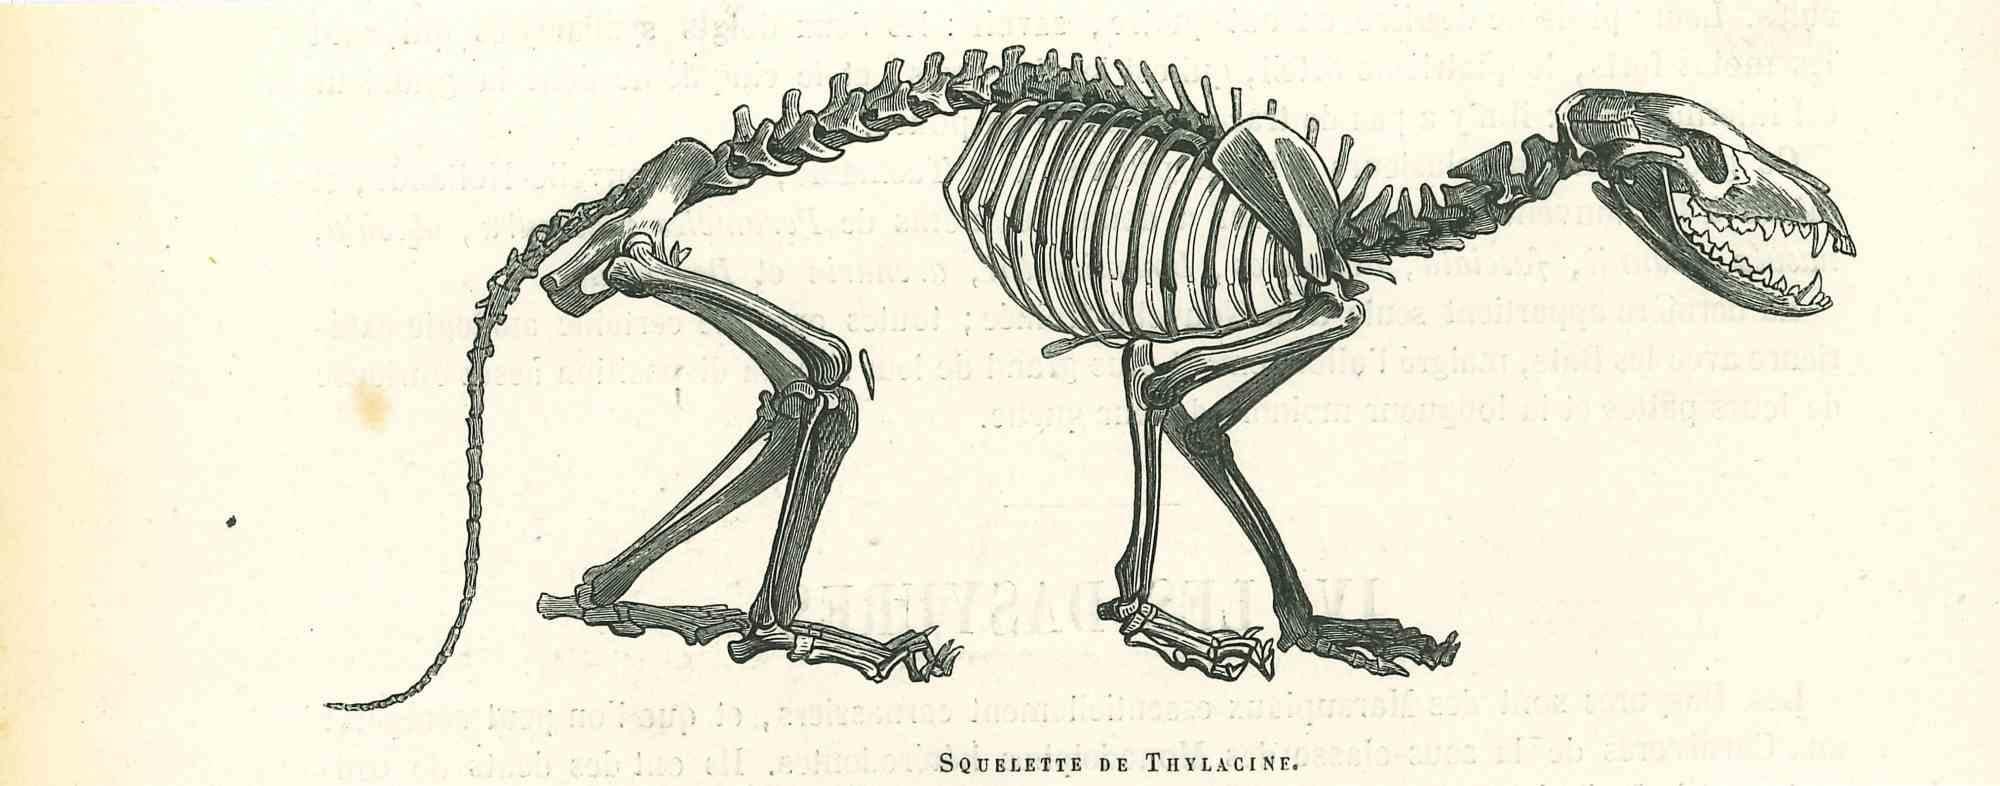 The Skeleton -  Lithograph by Paul Gervais - 1854